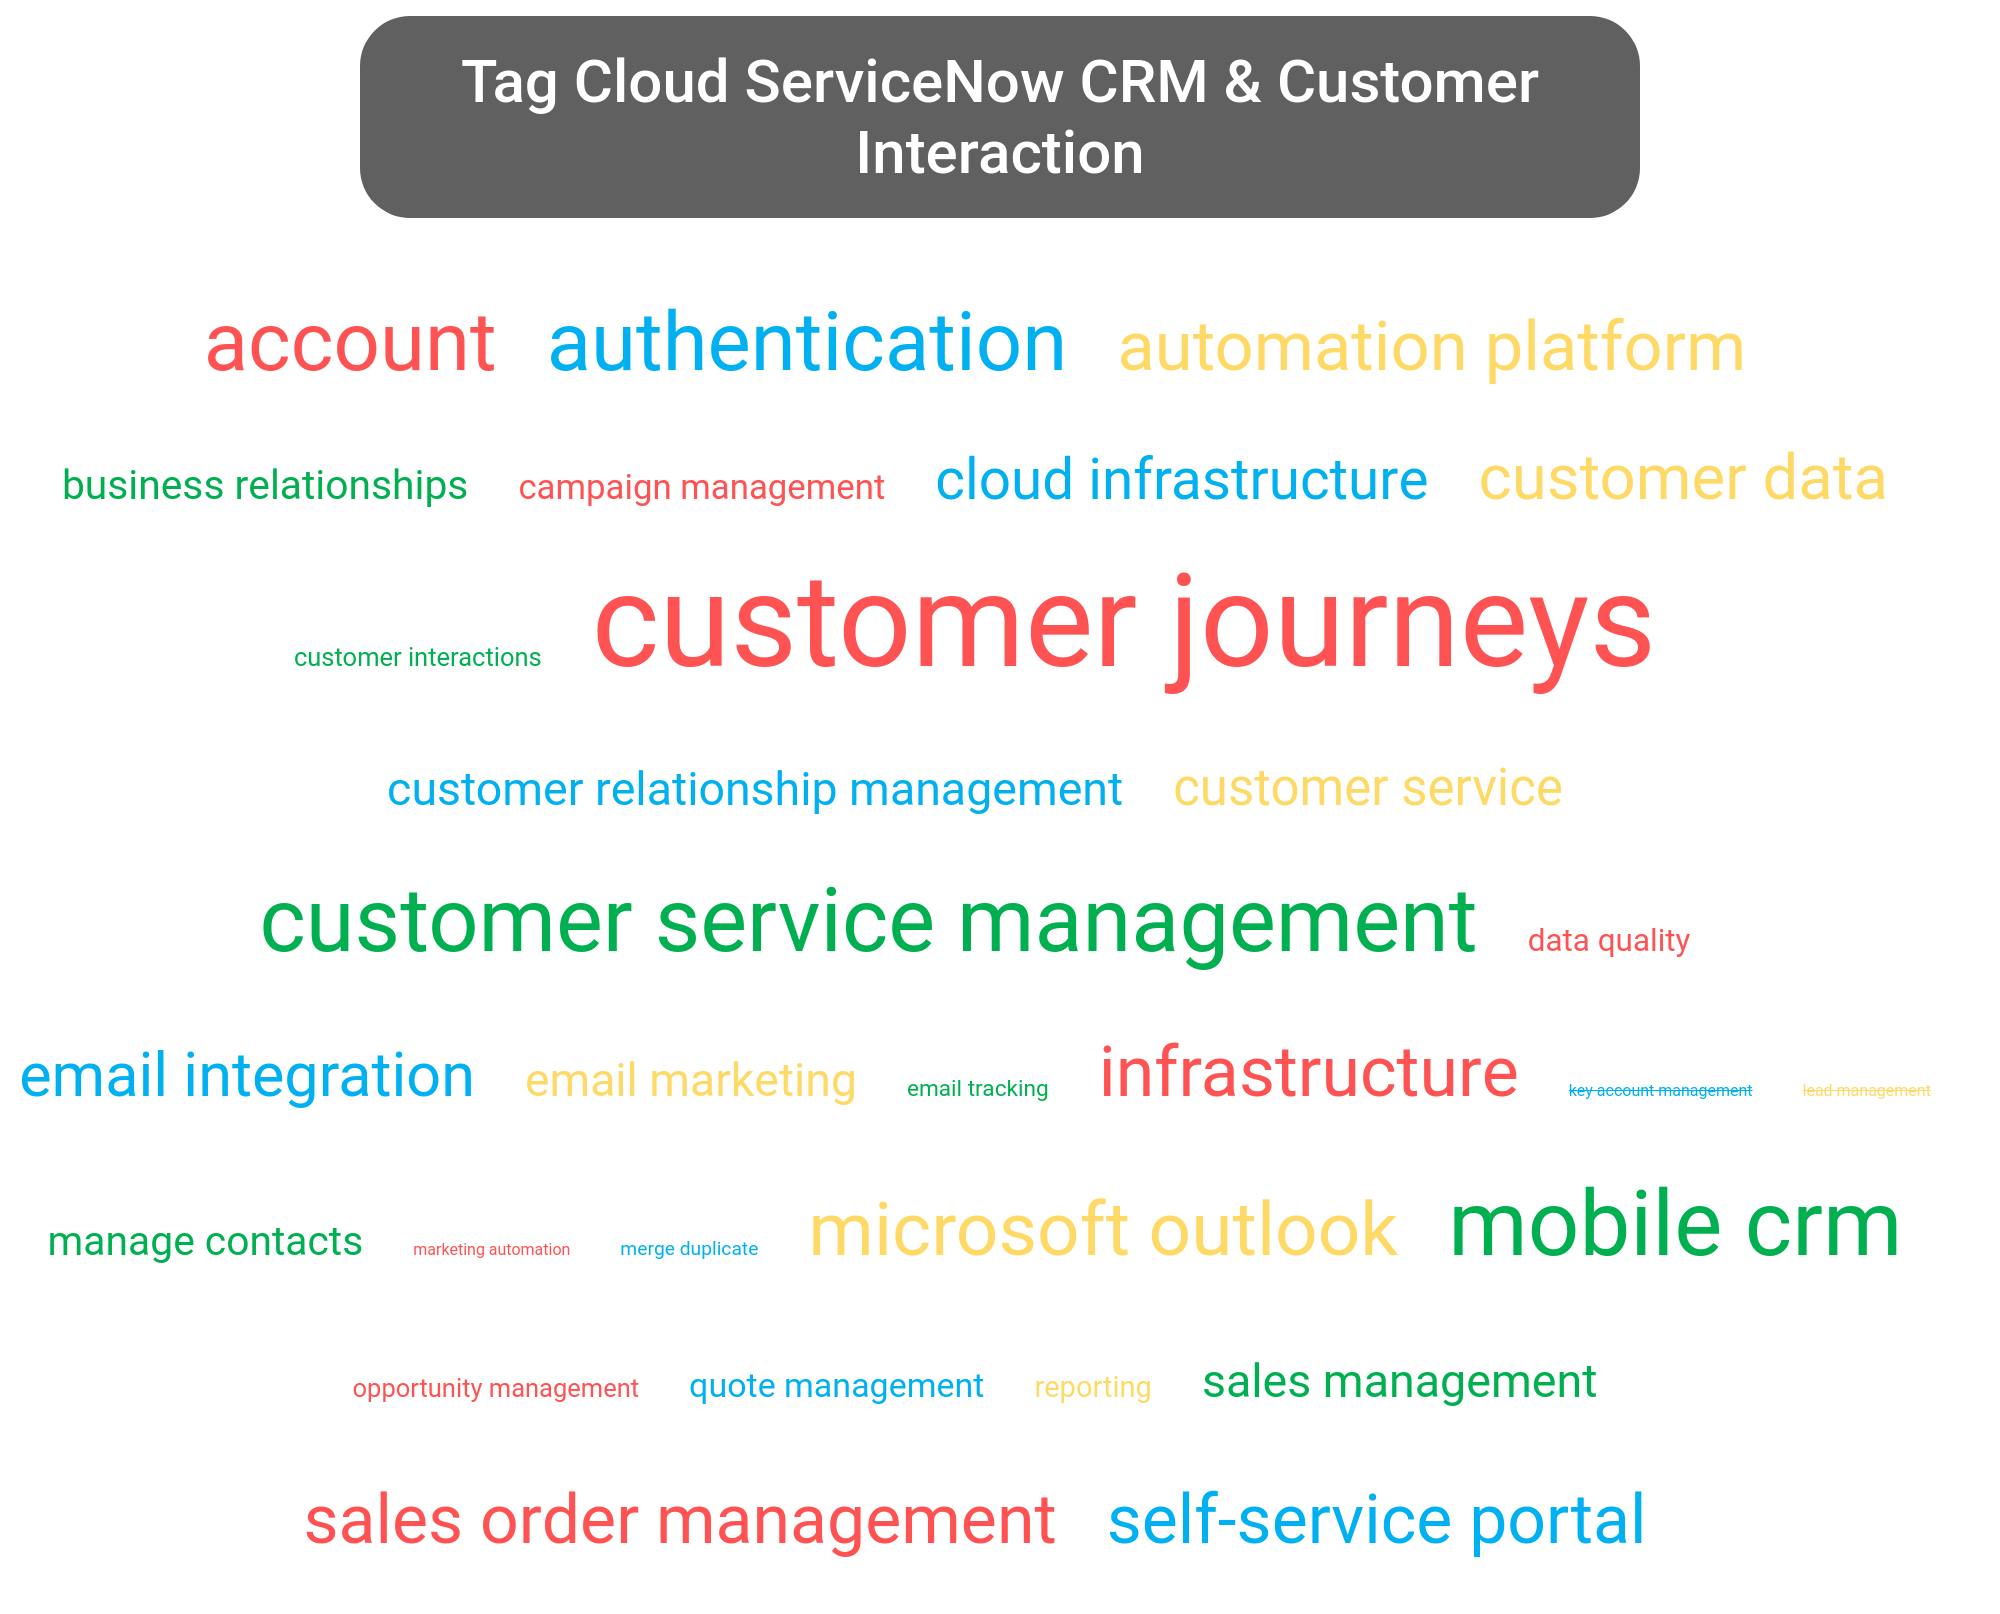 Tag cloud of the ServiceNow platform tools.